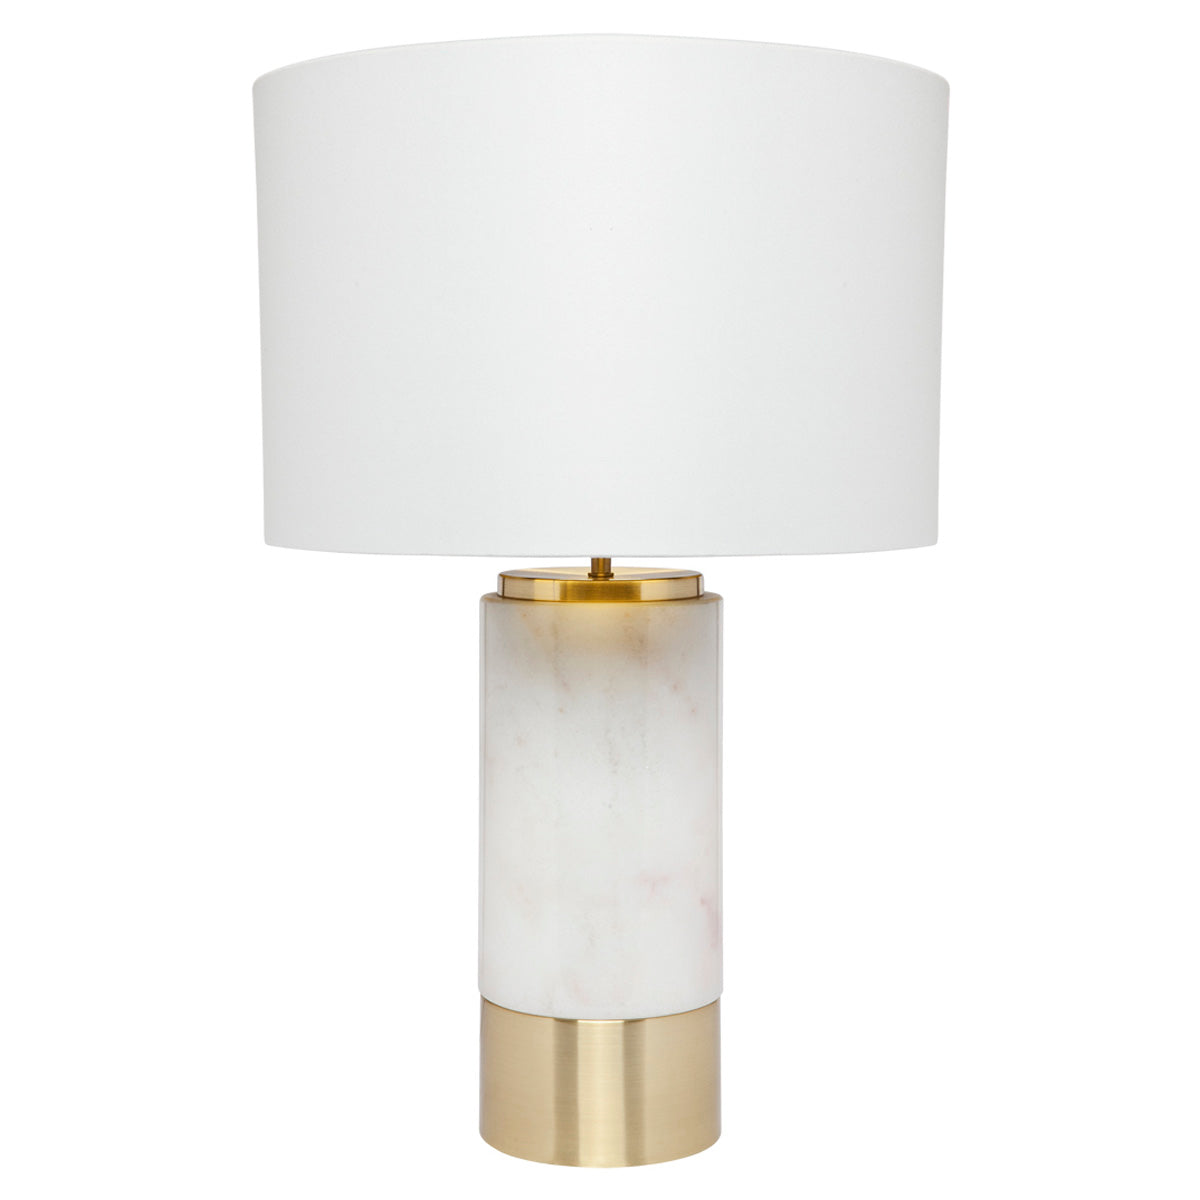 Paola Marble Table Lamp - White w White Shade